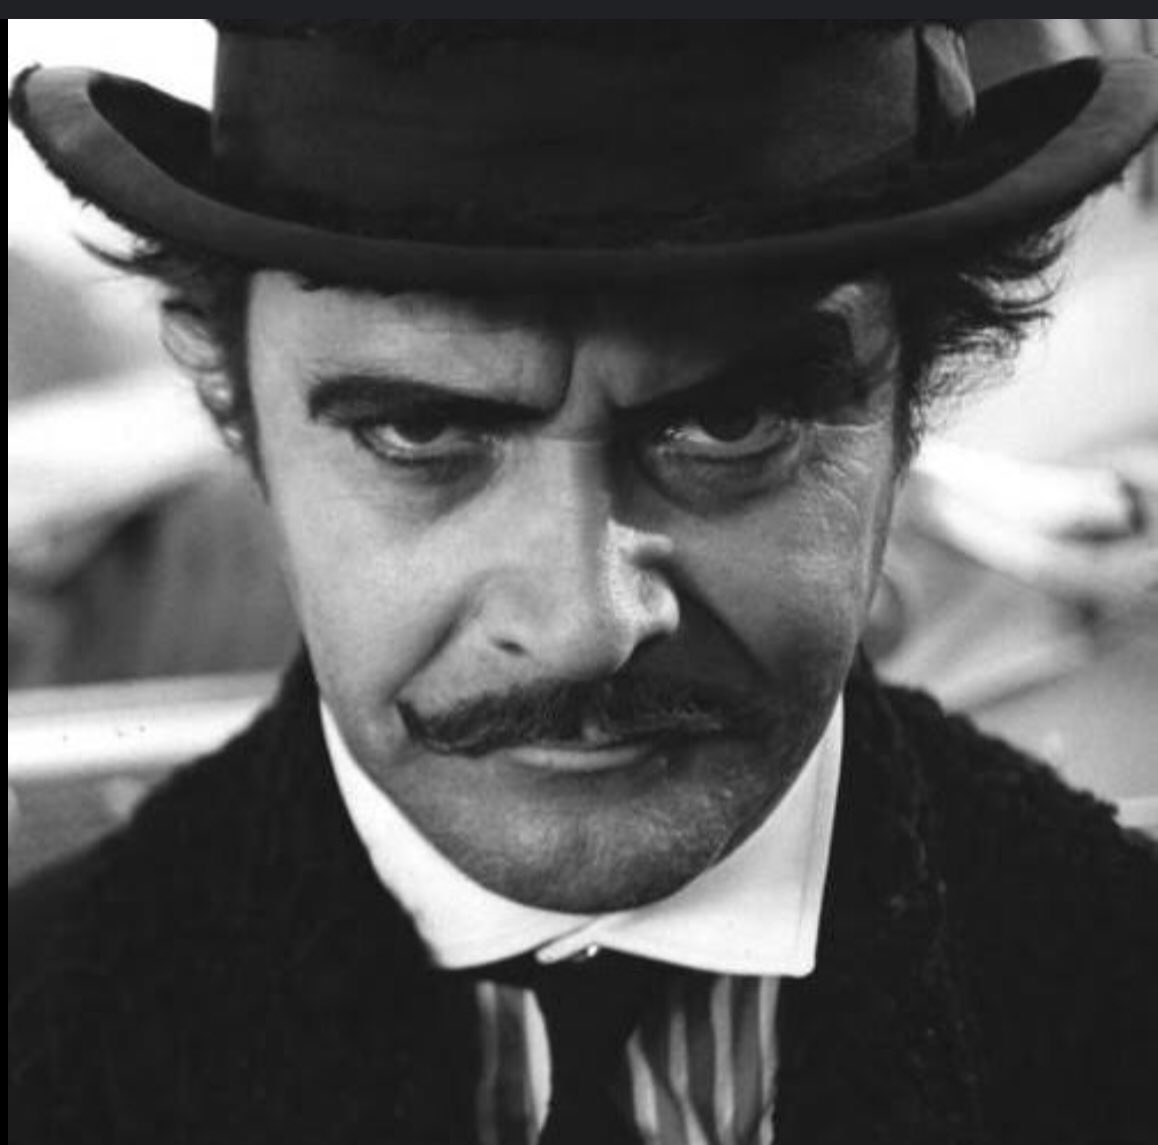 @PicturesFoIder #JackLemmon as #ProfessorFate in #TheGreatRace